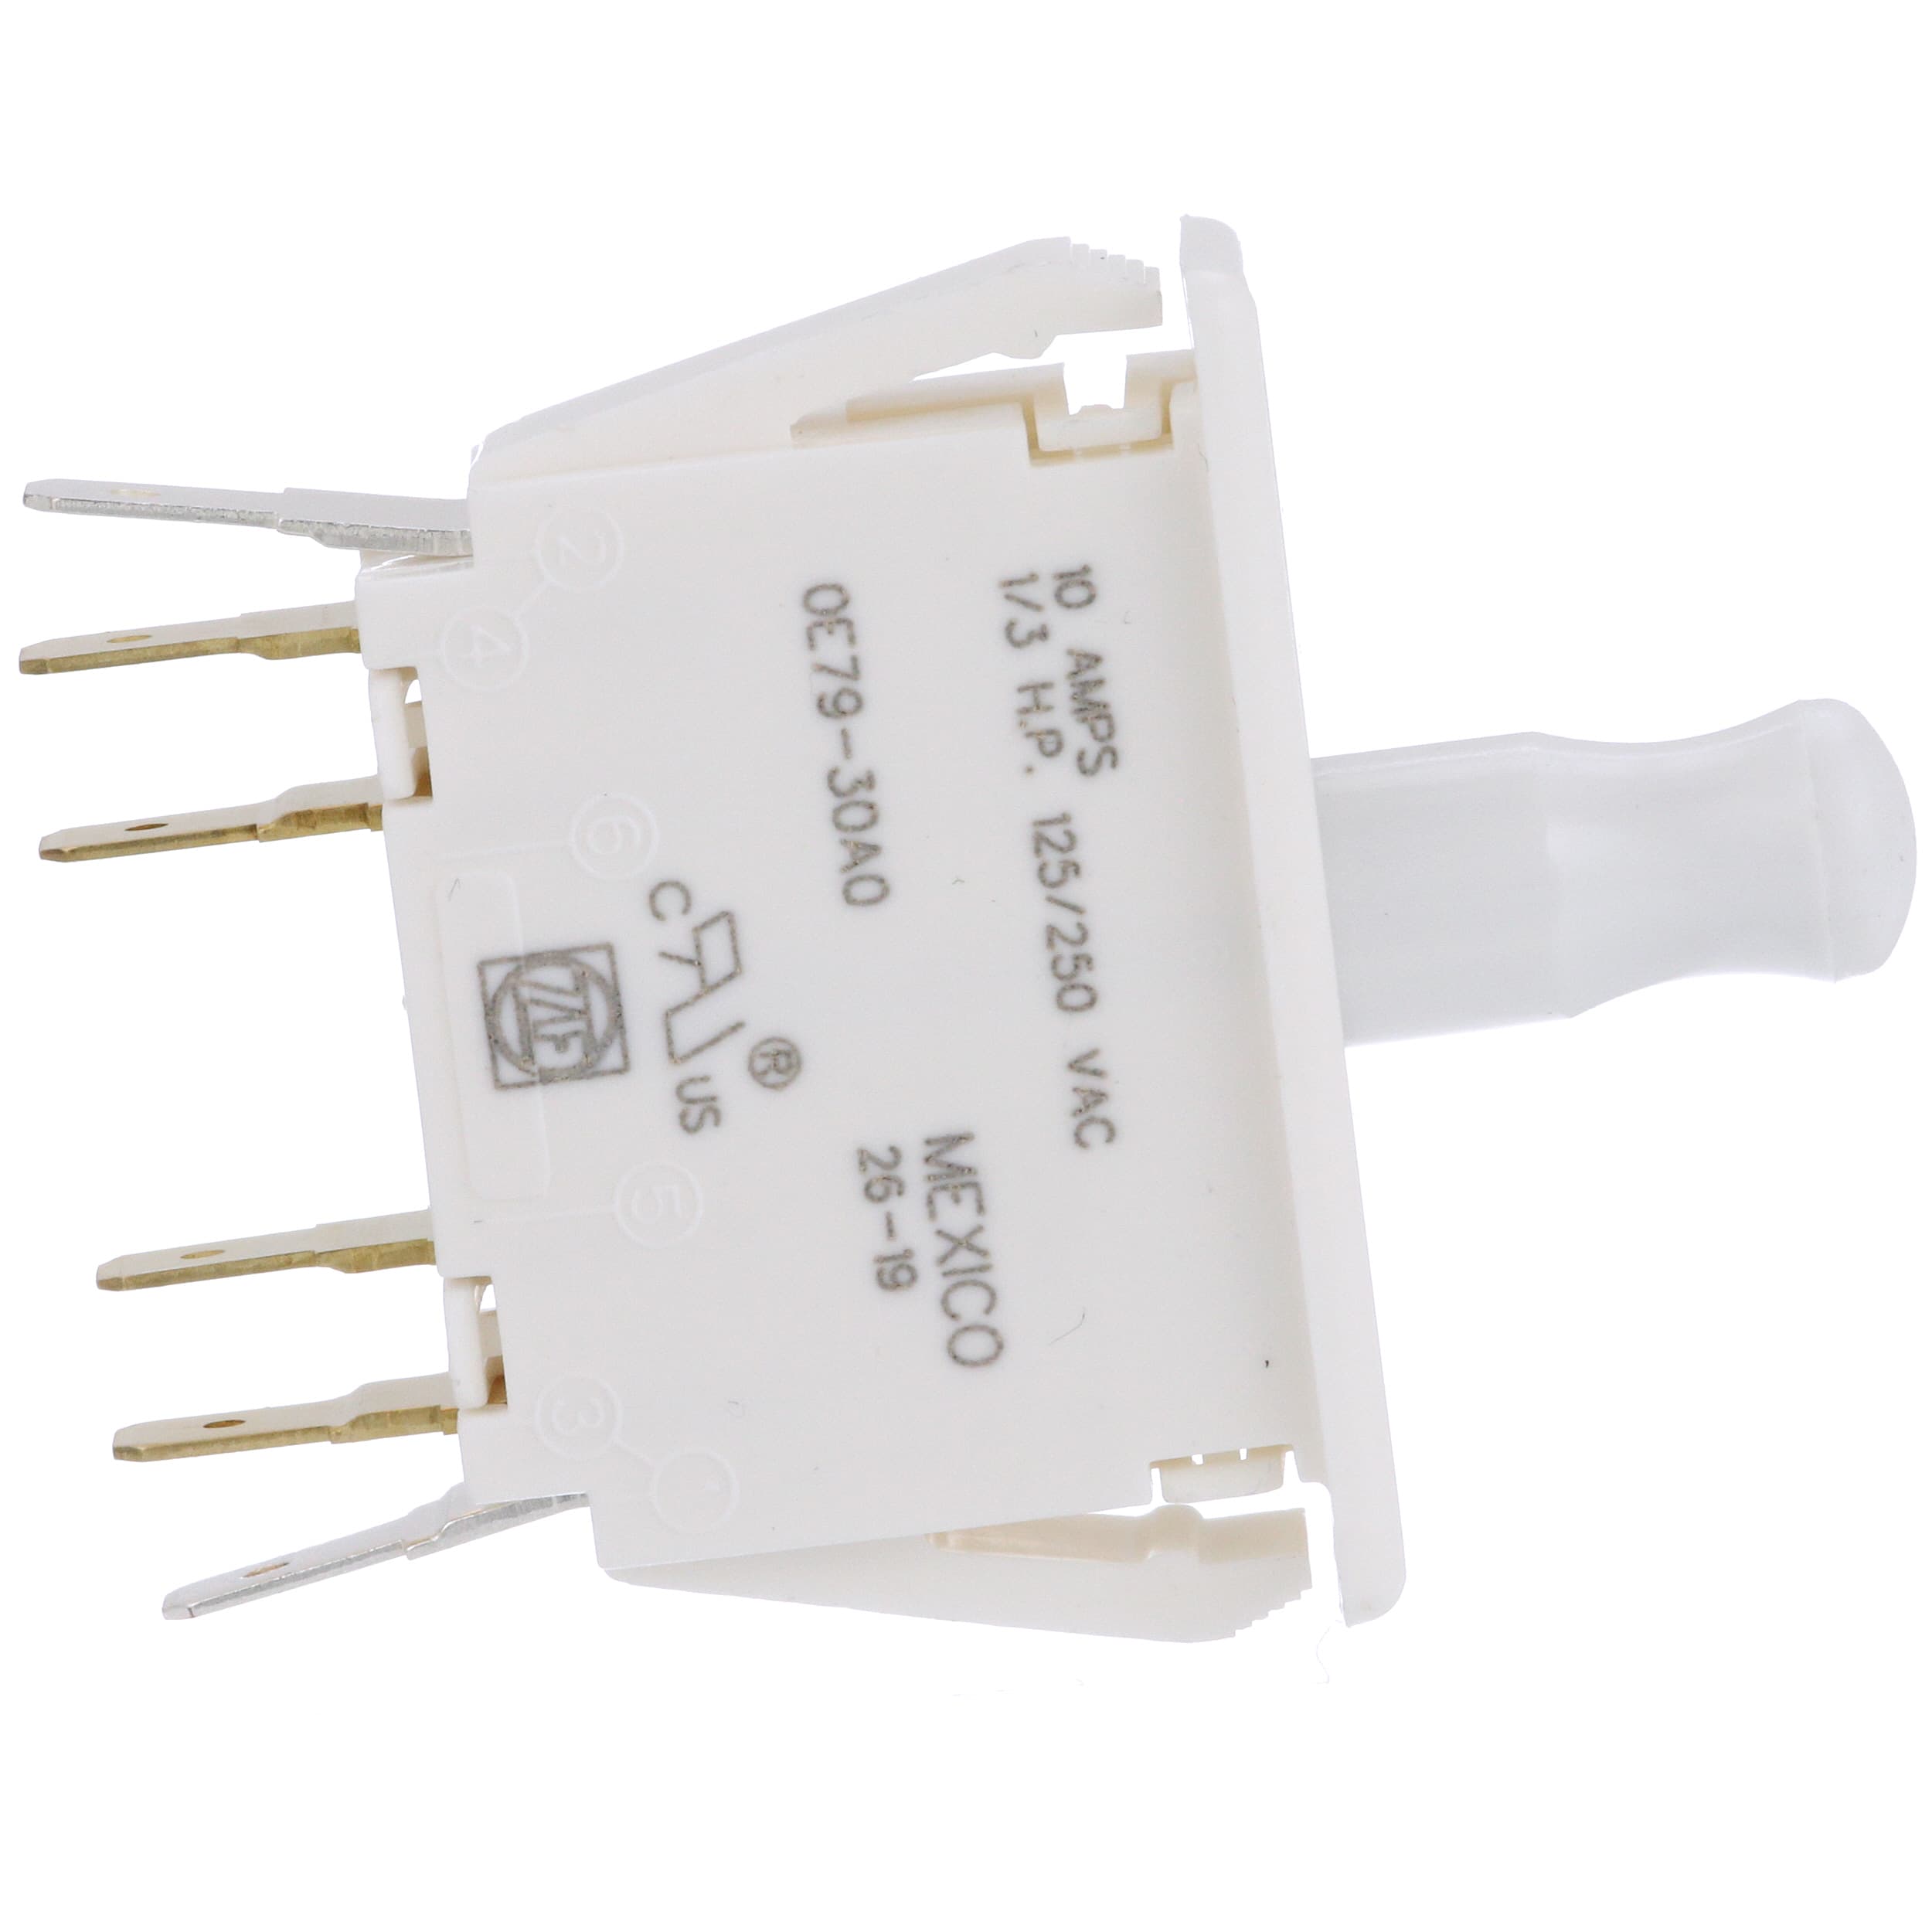 E79-30a Cherry Switch Snap Action DPDT 10a 125v for sale online